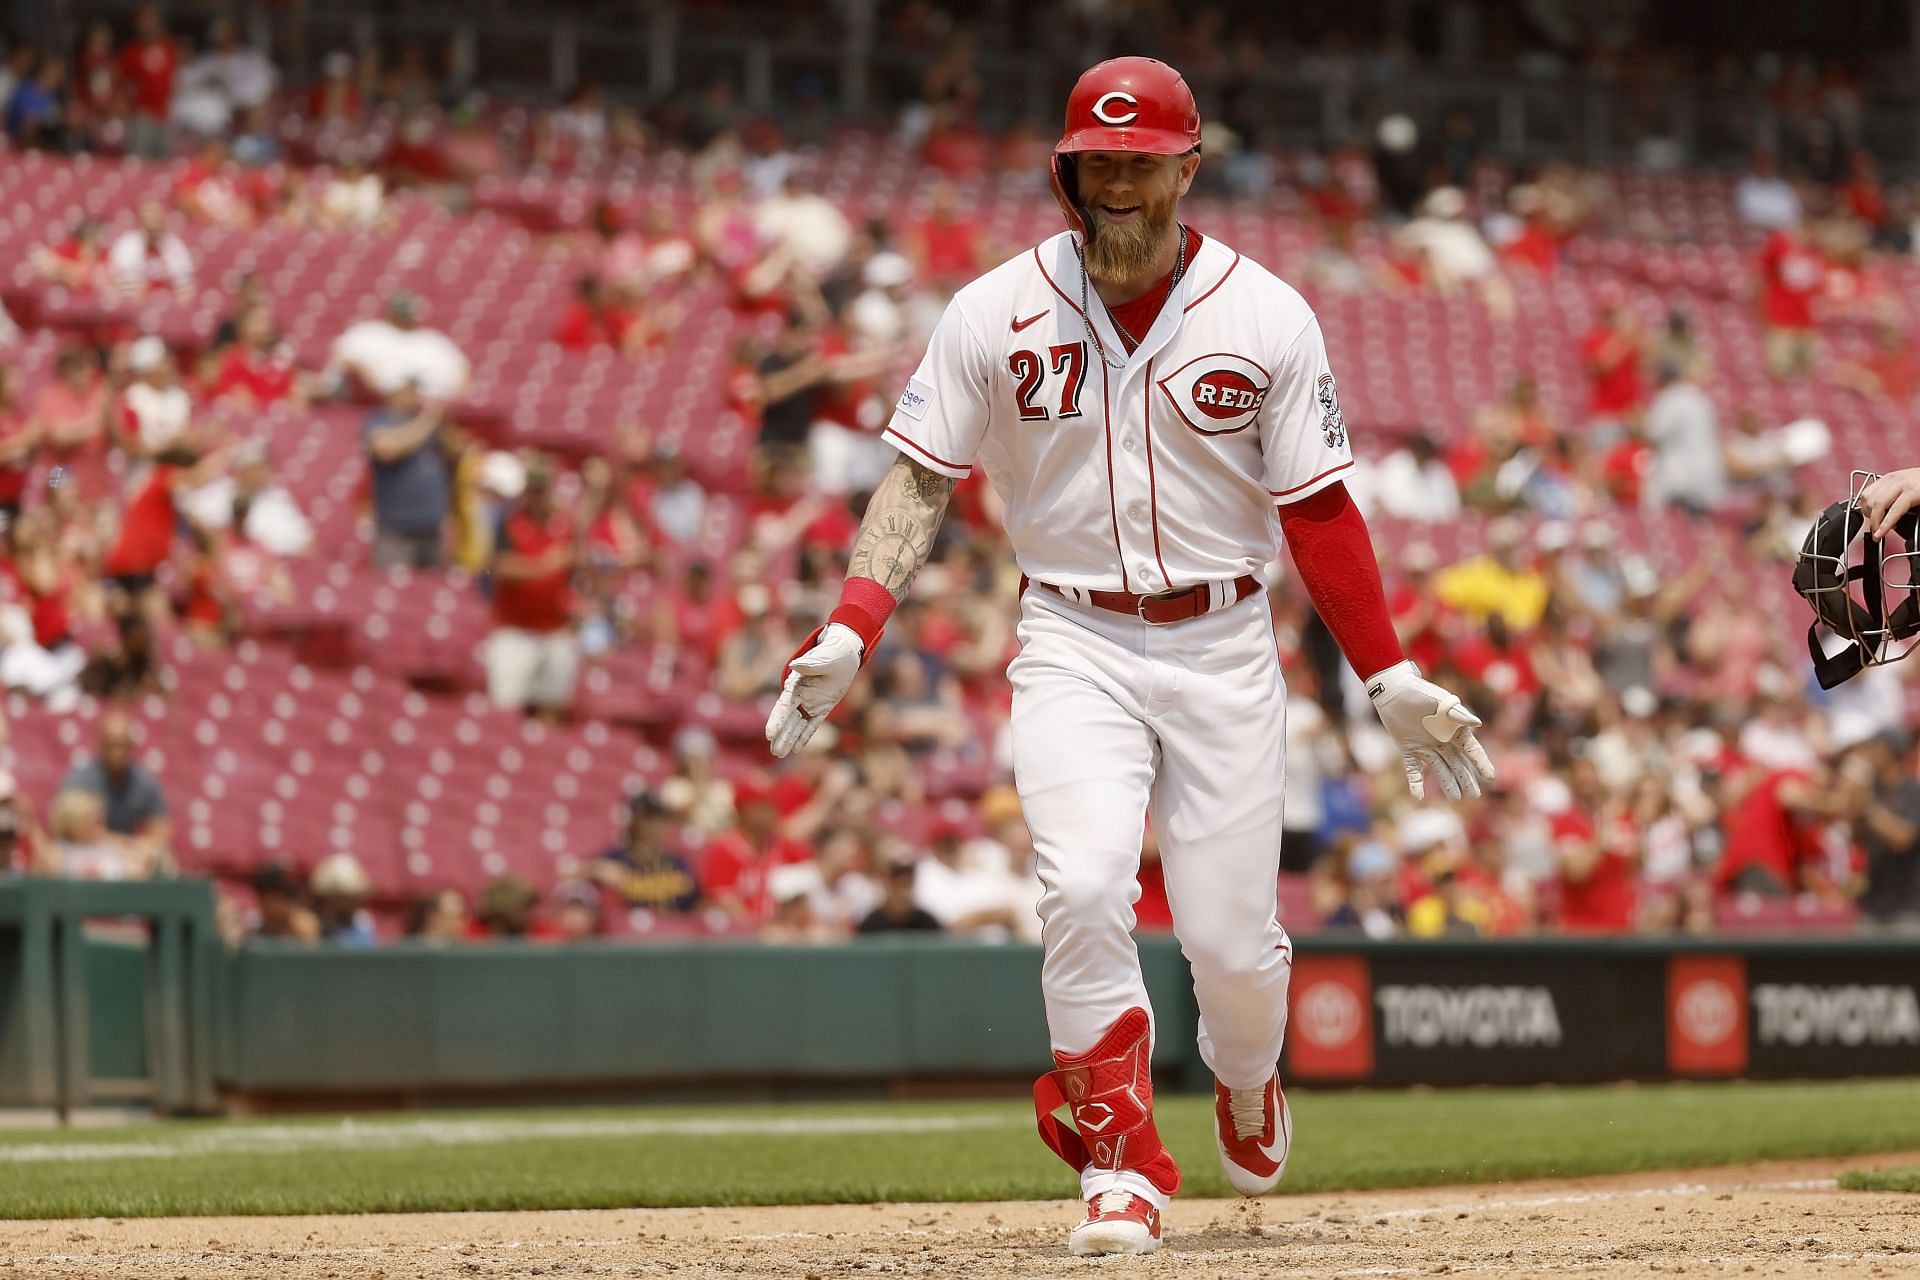 Jake Fraley #27 of the Cincinnati Reds reacts after hitting a solo home run during the seventh inning of a game against the Milwaukee Brewers